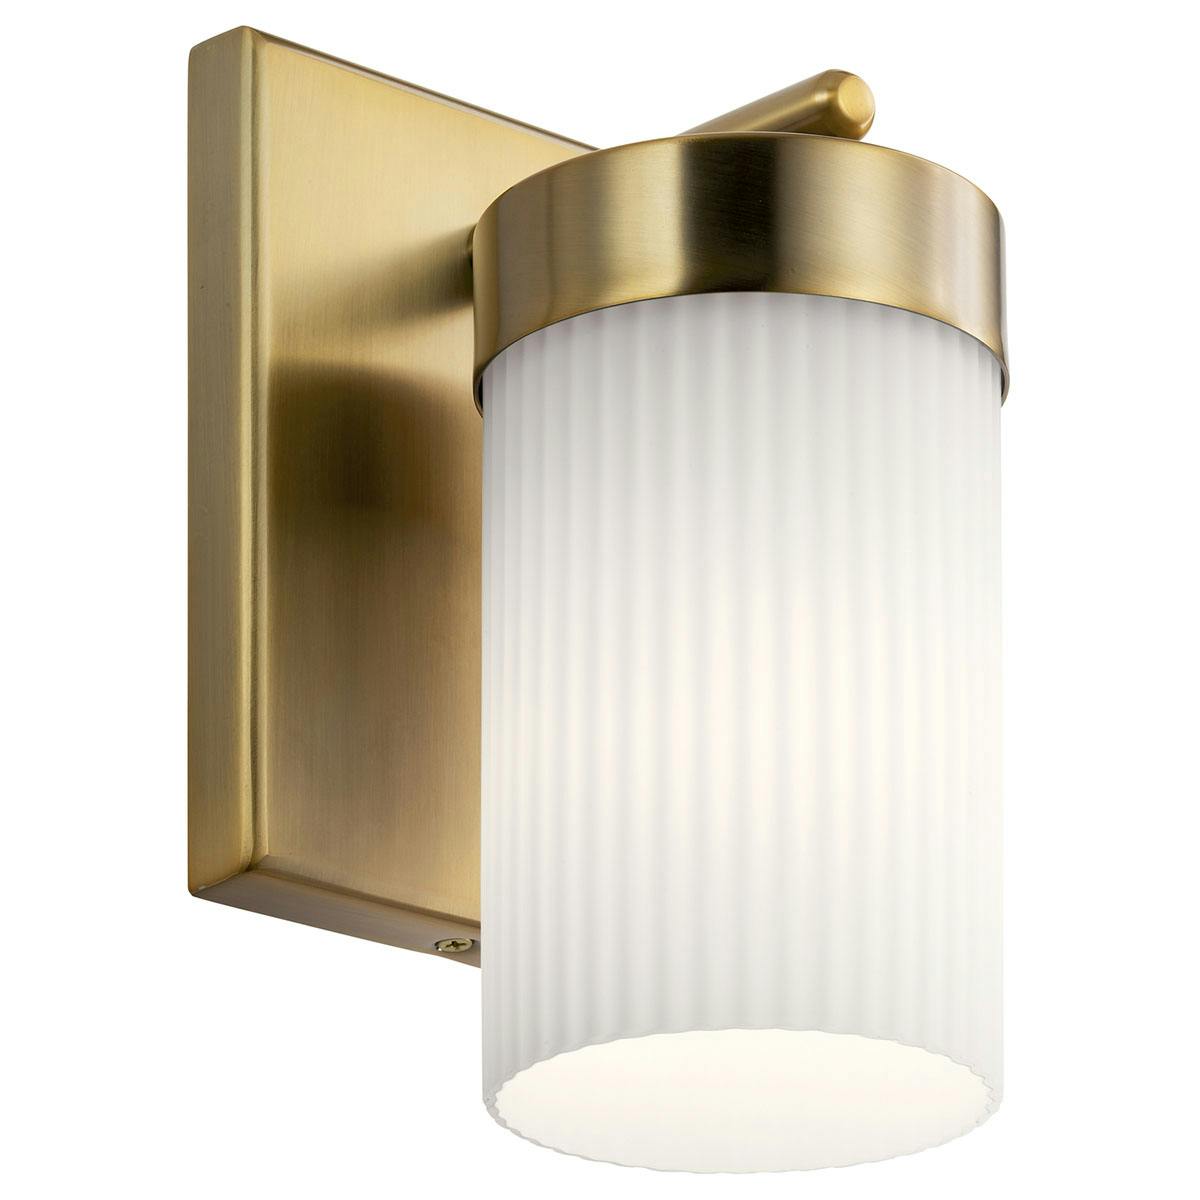 Ciona 9" 1 Light Sconce in Brass on a white background